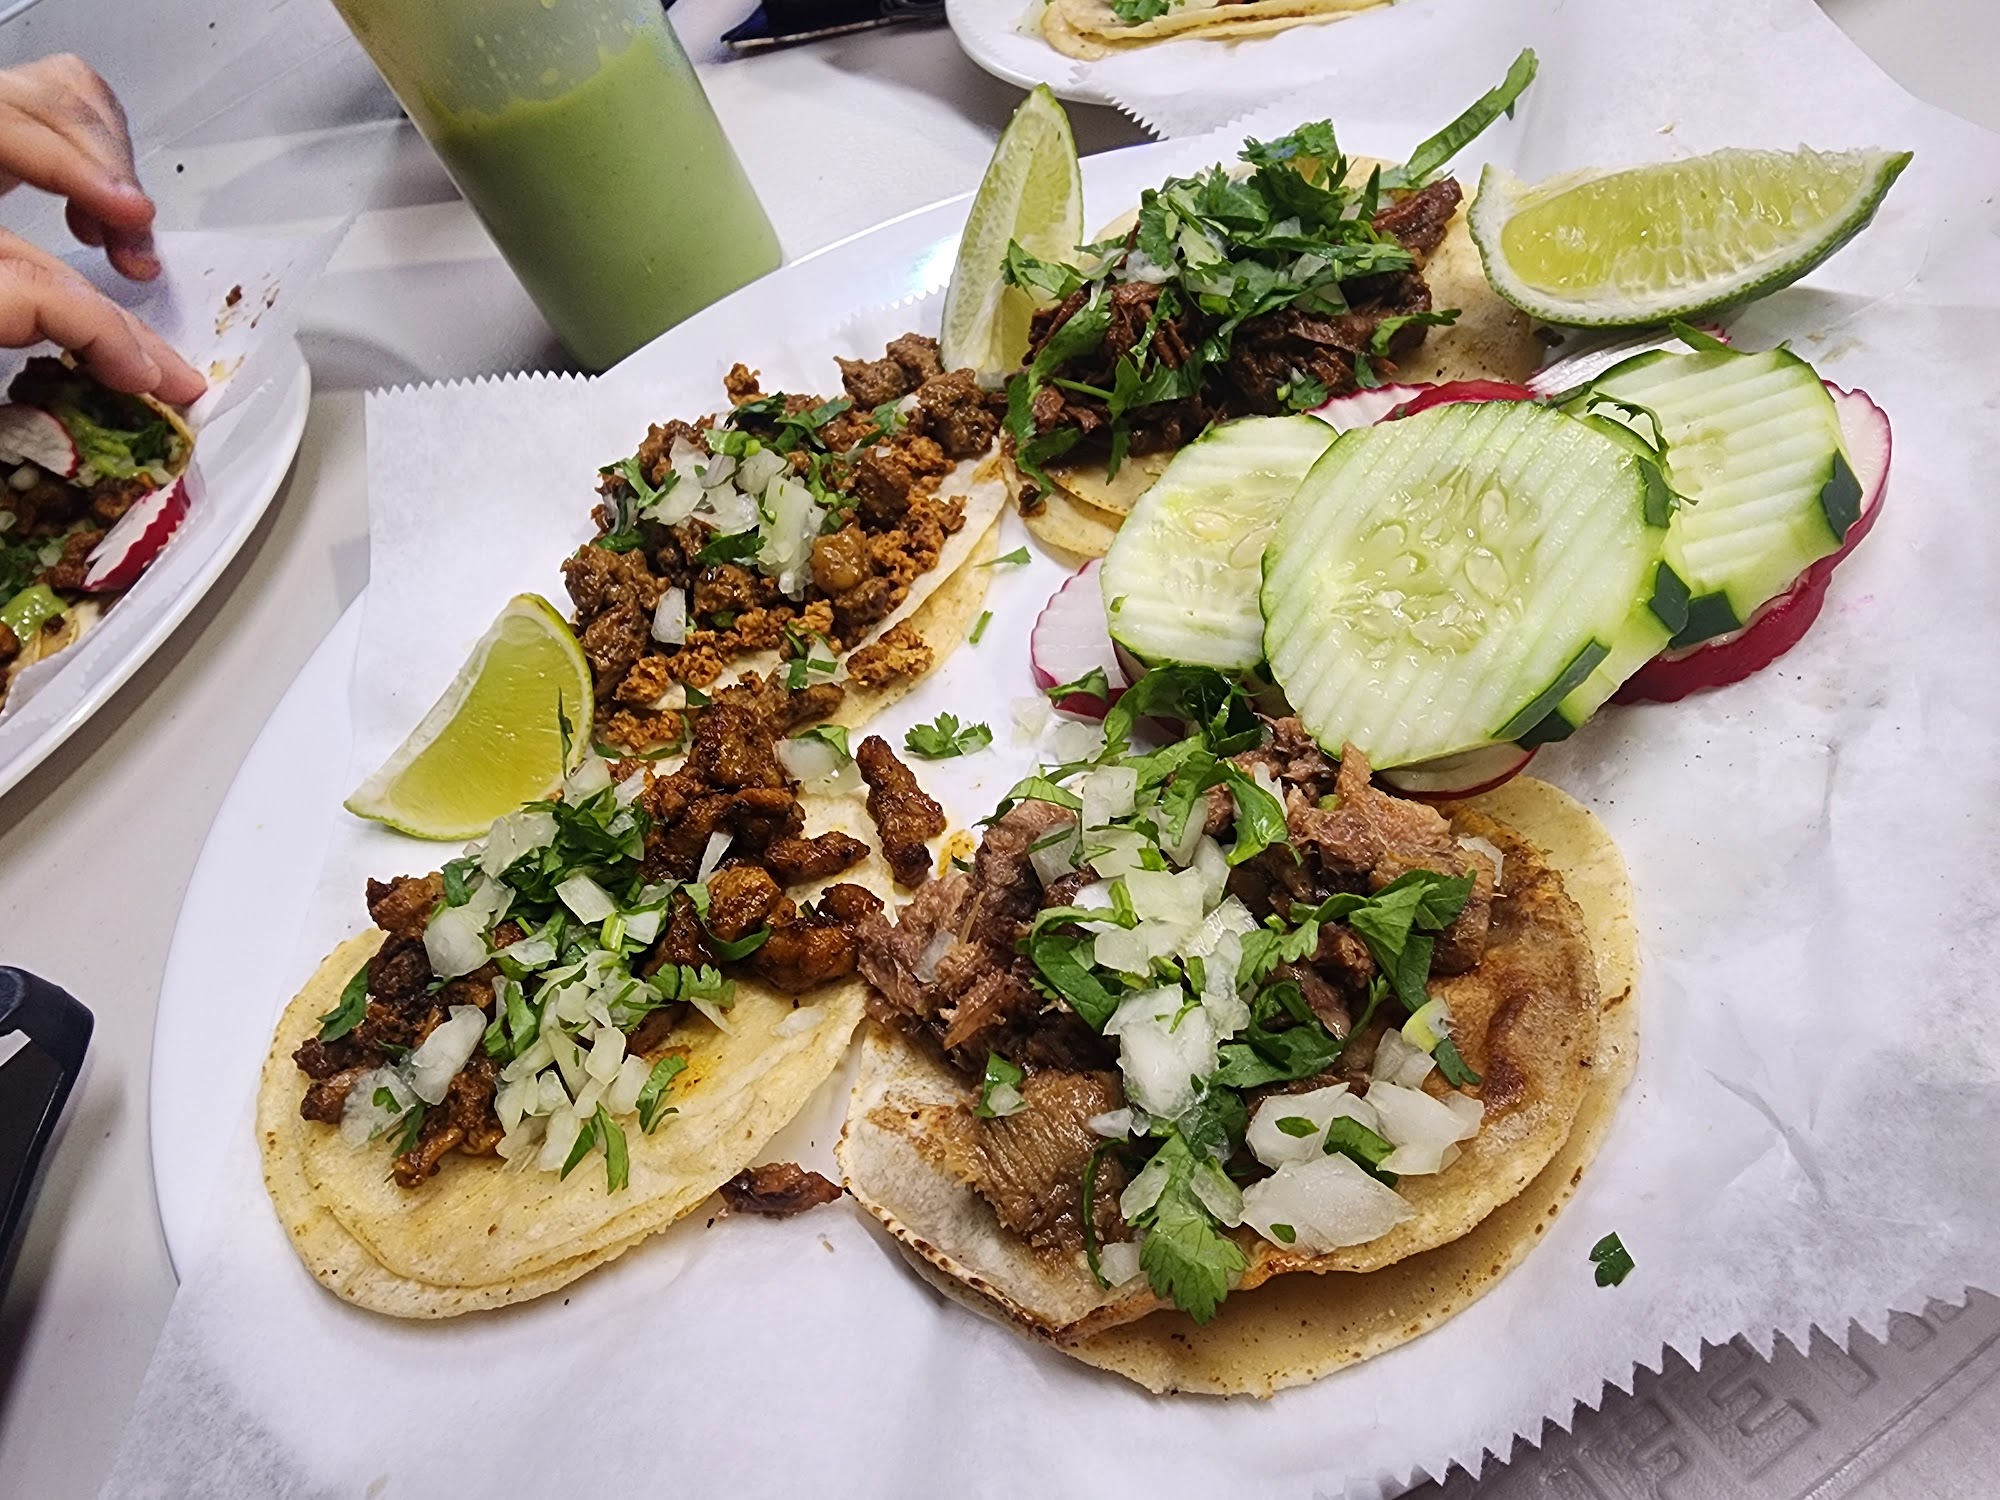 Chiscos Tacos (The Best in Town)